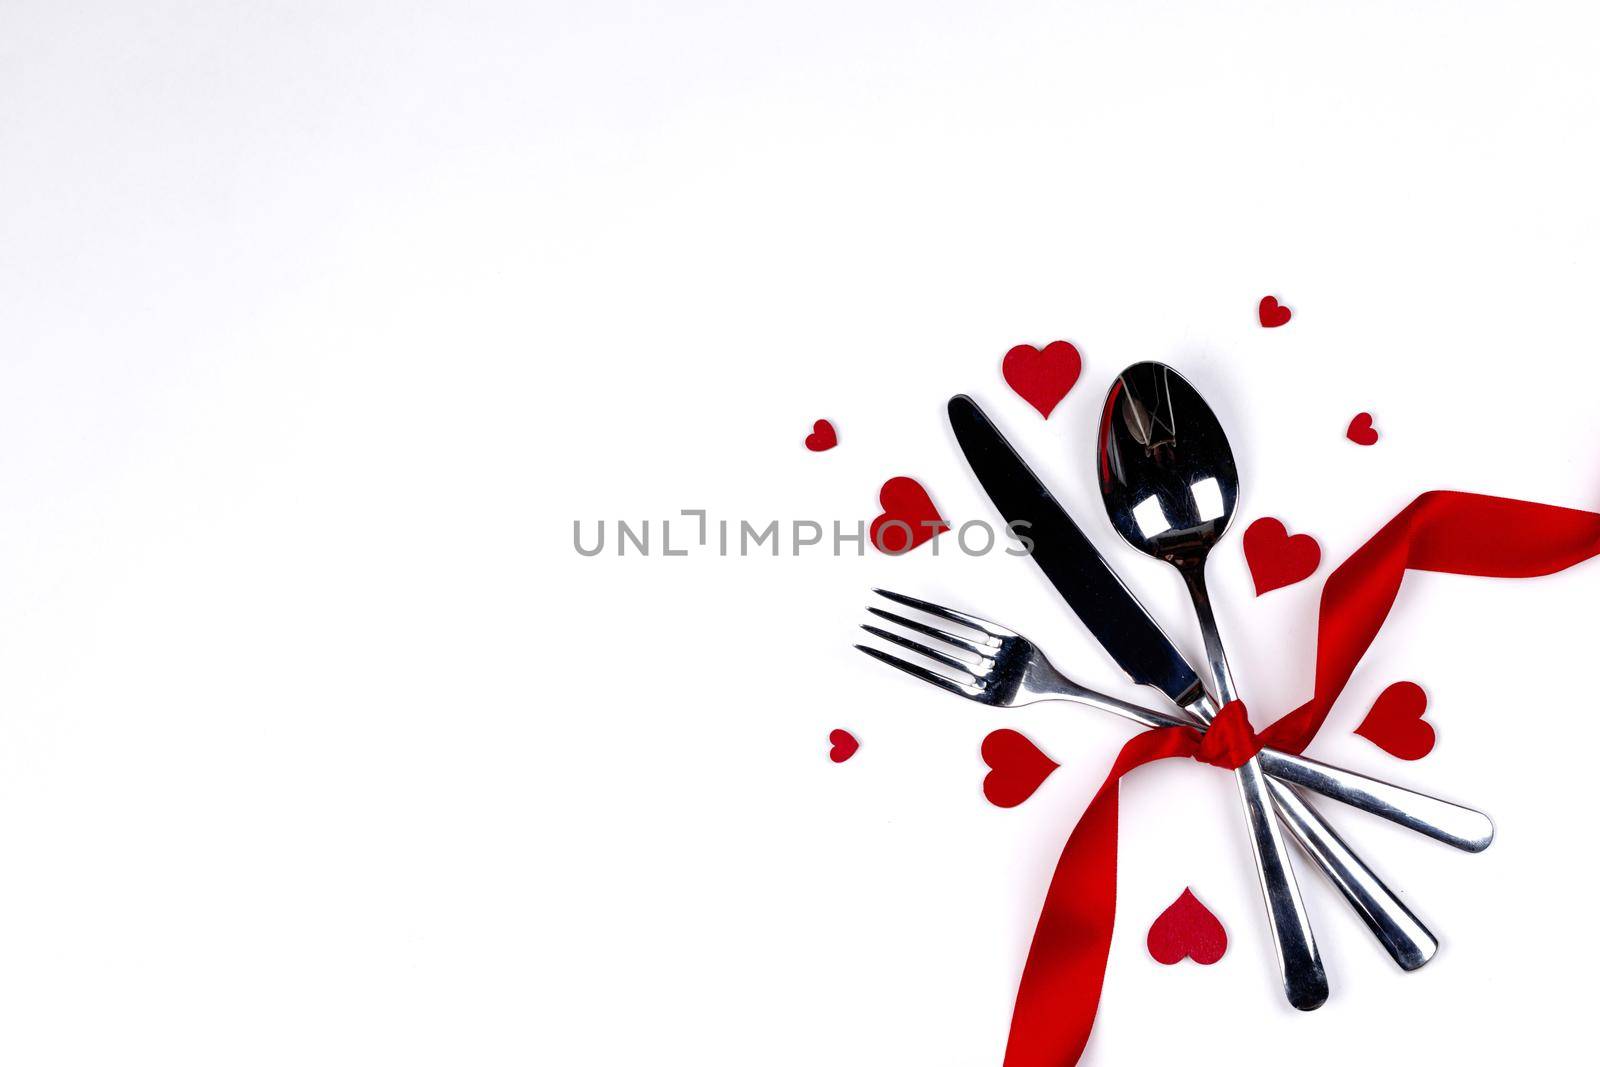 Cutlery set and hearts by Yellowj